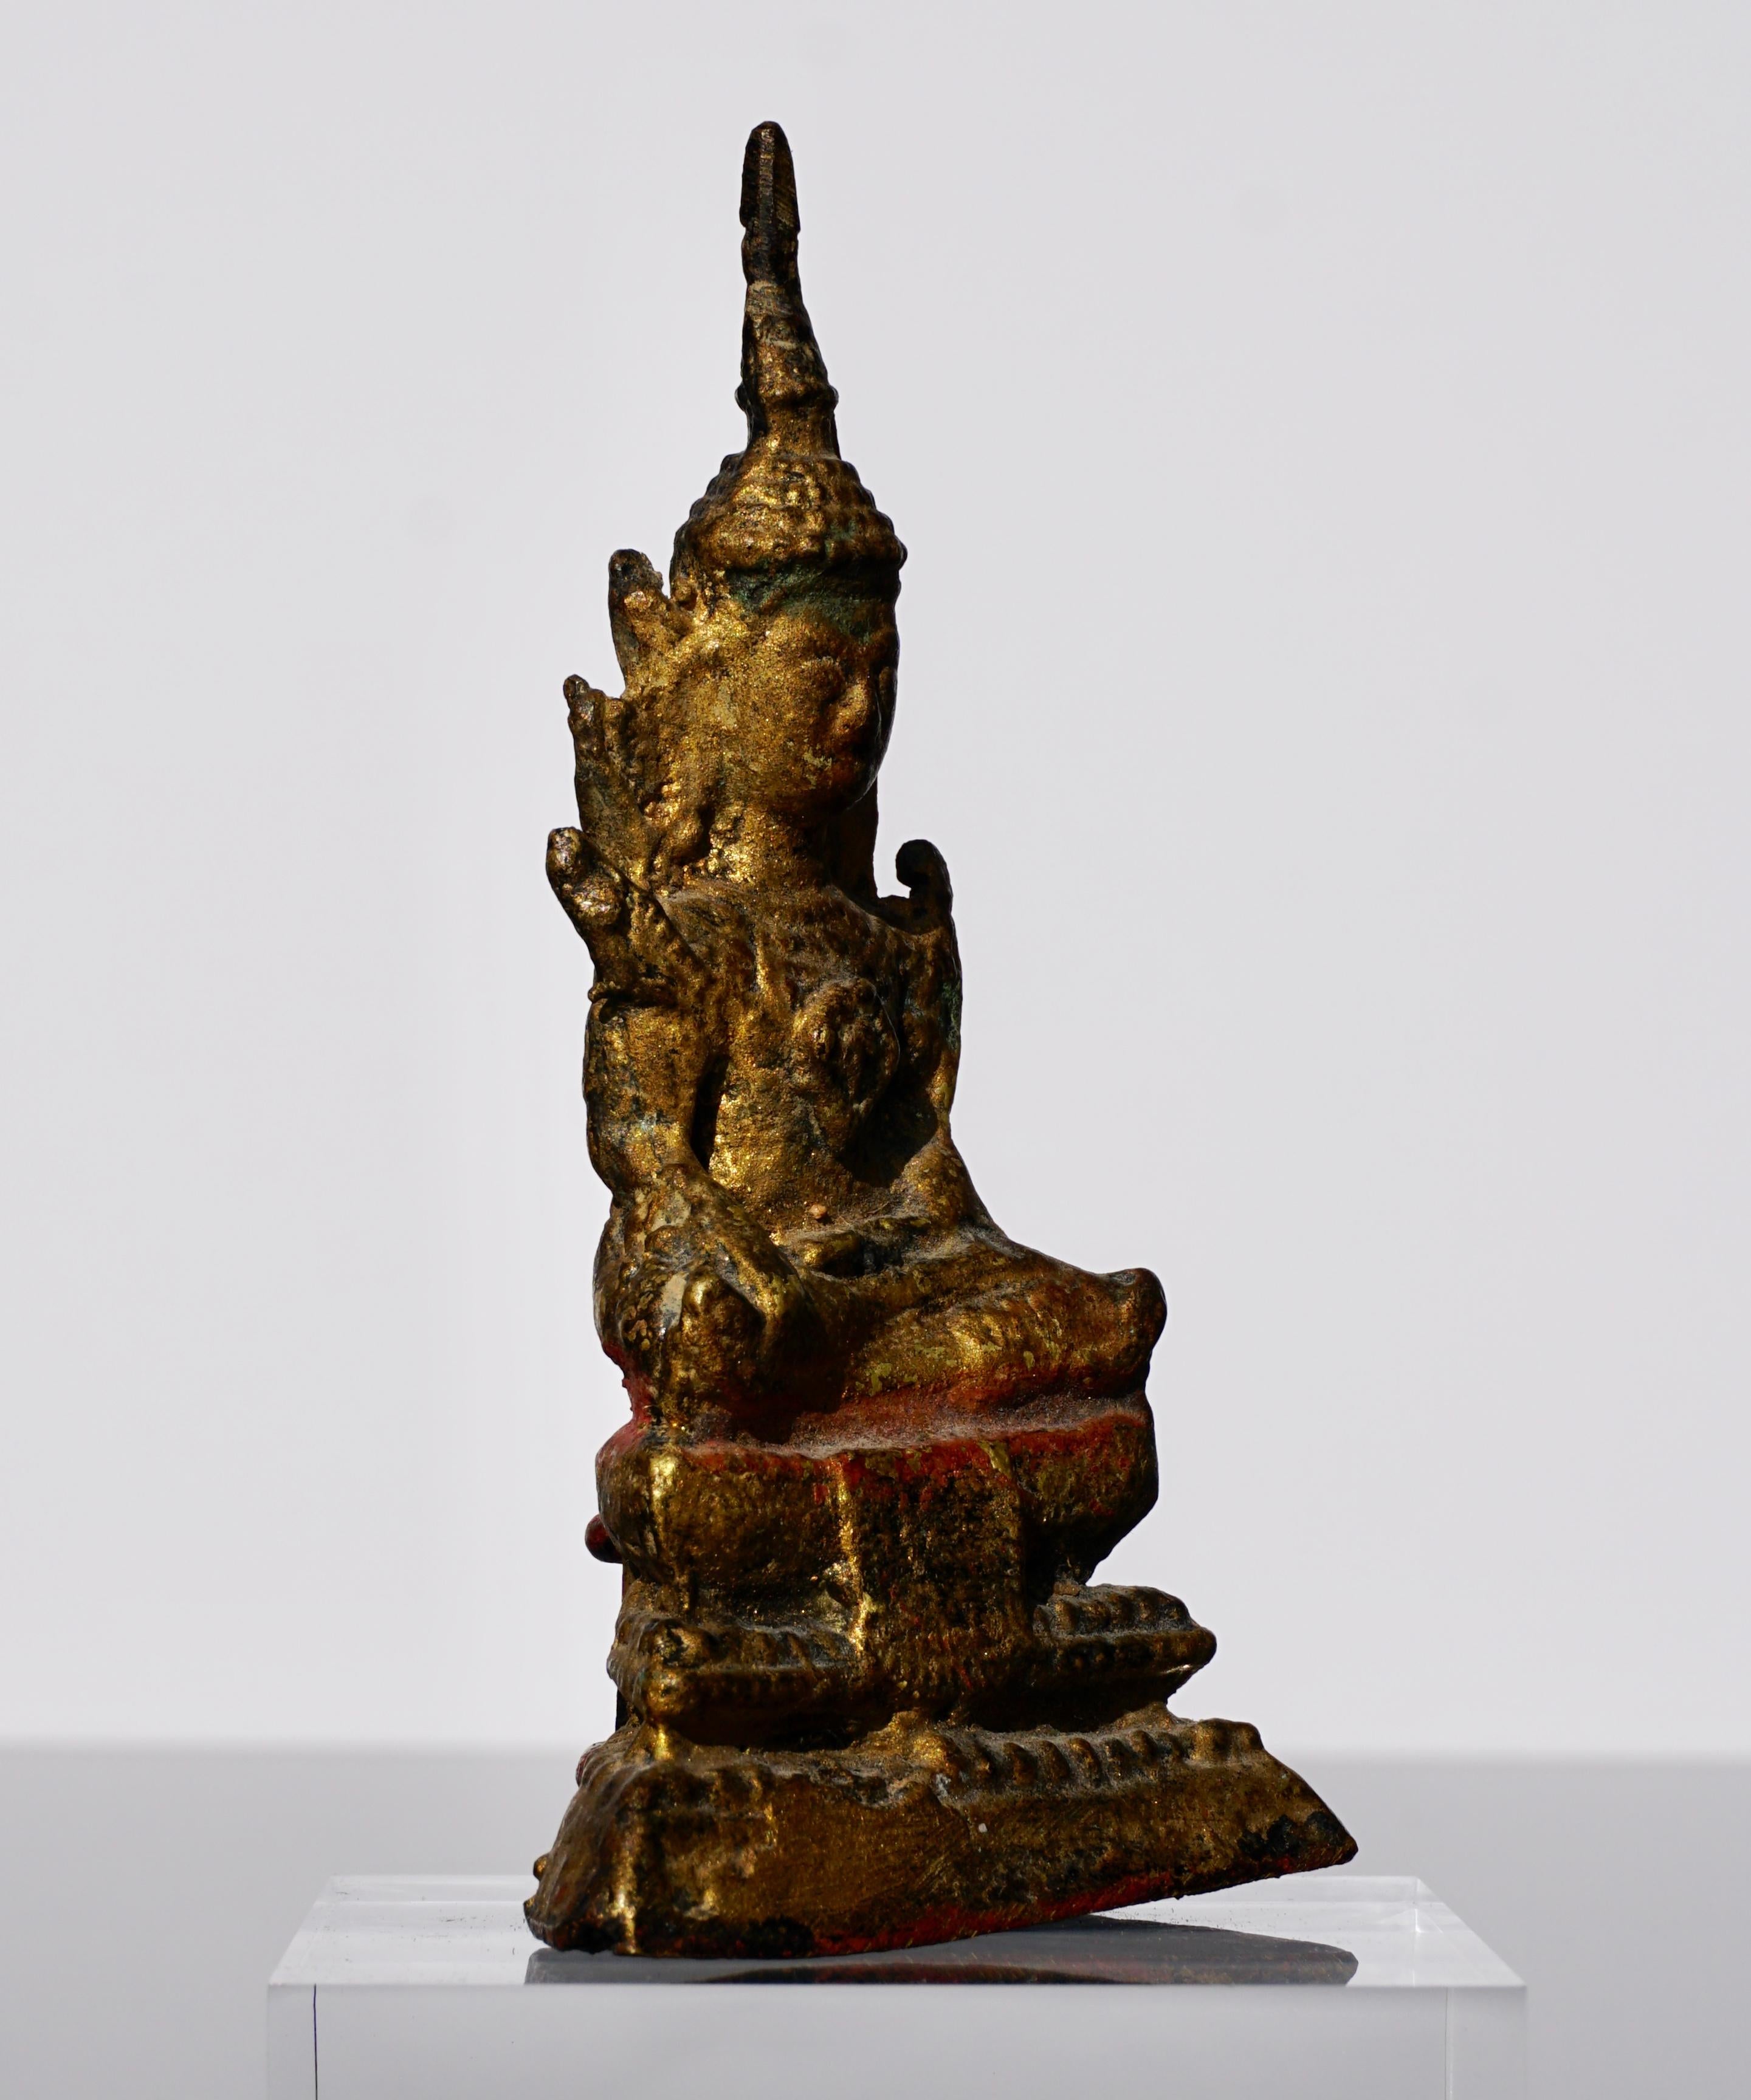 A small and delightful gilt gold bronze Buddha from Thailand.

Measures: Height 4.75 inches (12 cm)
Width 2.7 inches (7 cm)
Depth 1.5 inches (4 cm).

AVANTIQUES is dedicated to providing an exclusive curated collection of Fine Arts, Paintings,